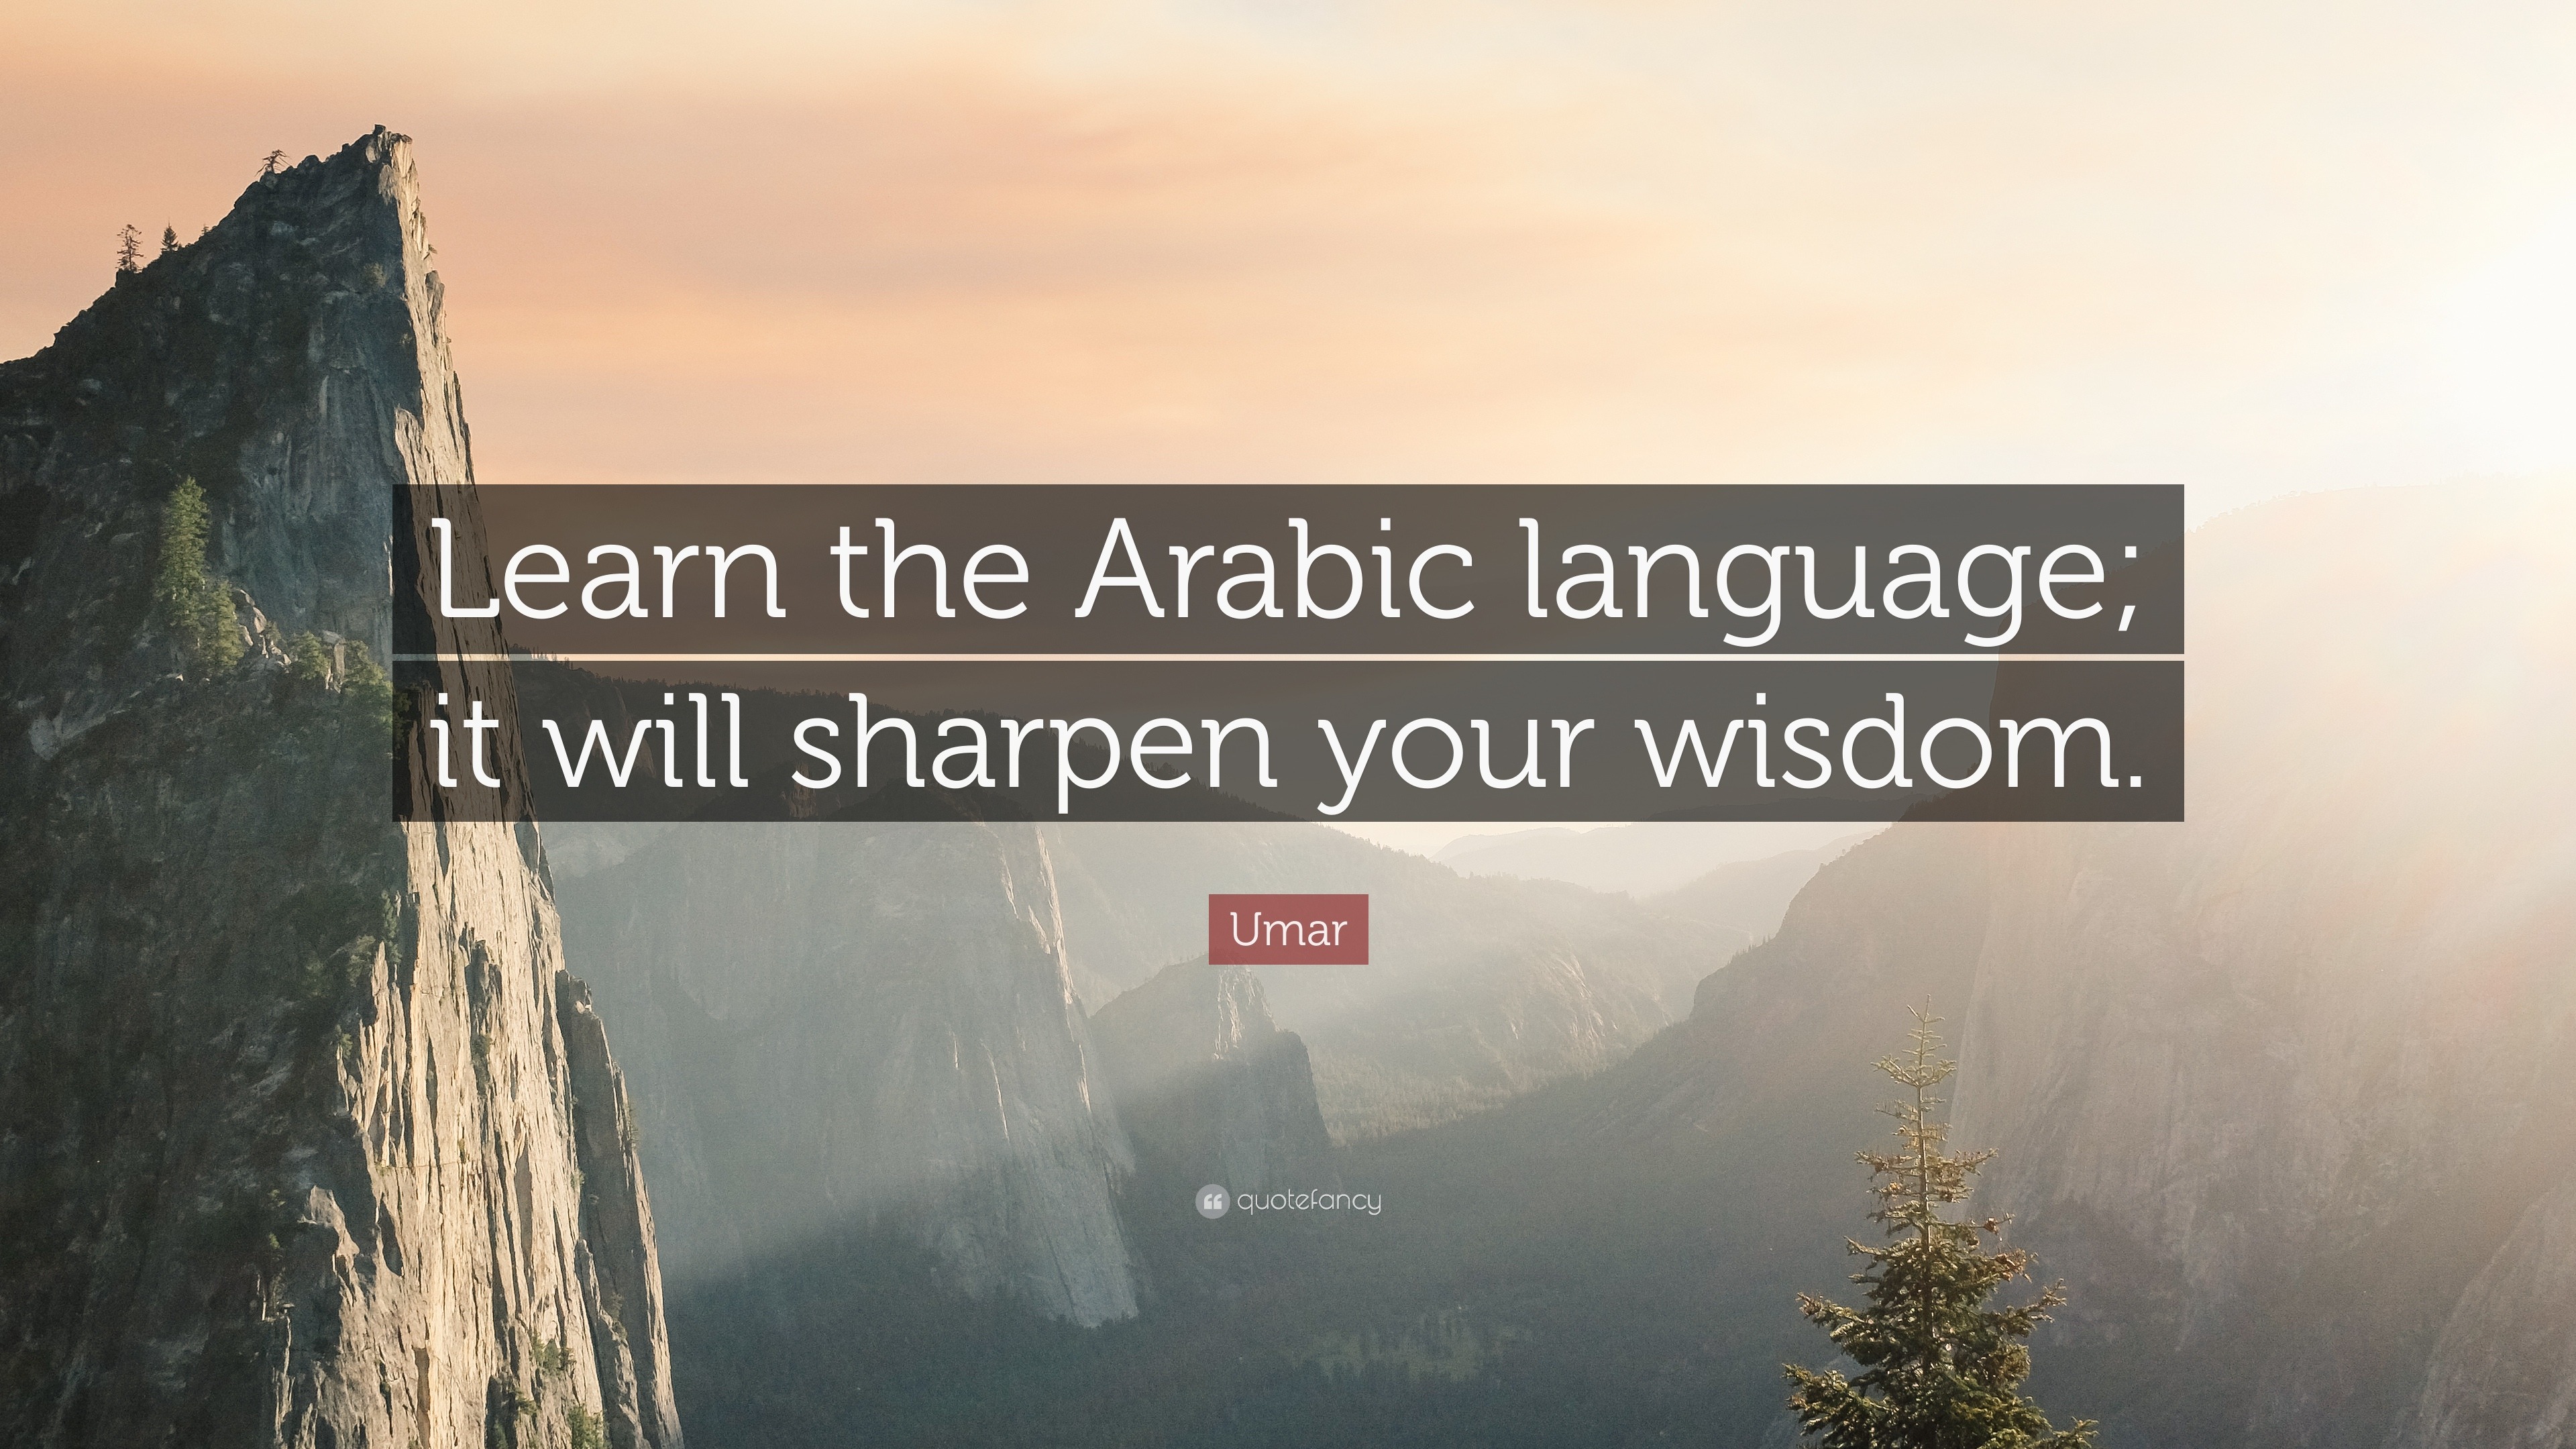 Umar Quote “Learn the Arabic language; it will sharpen